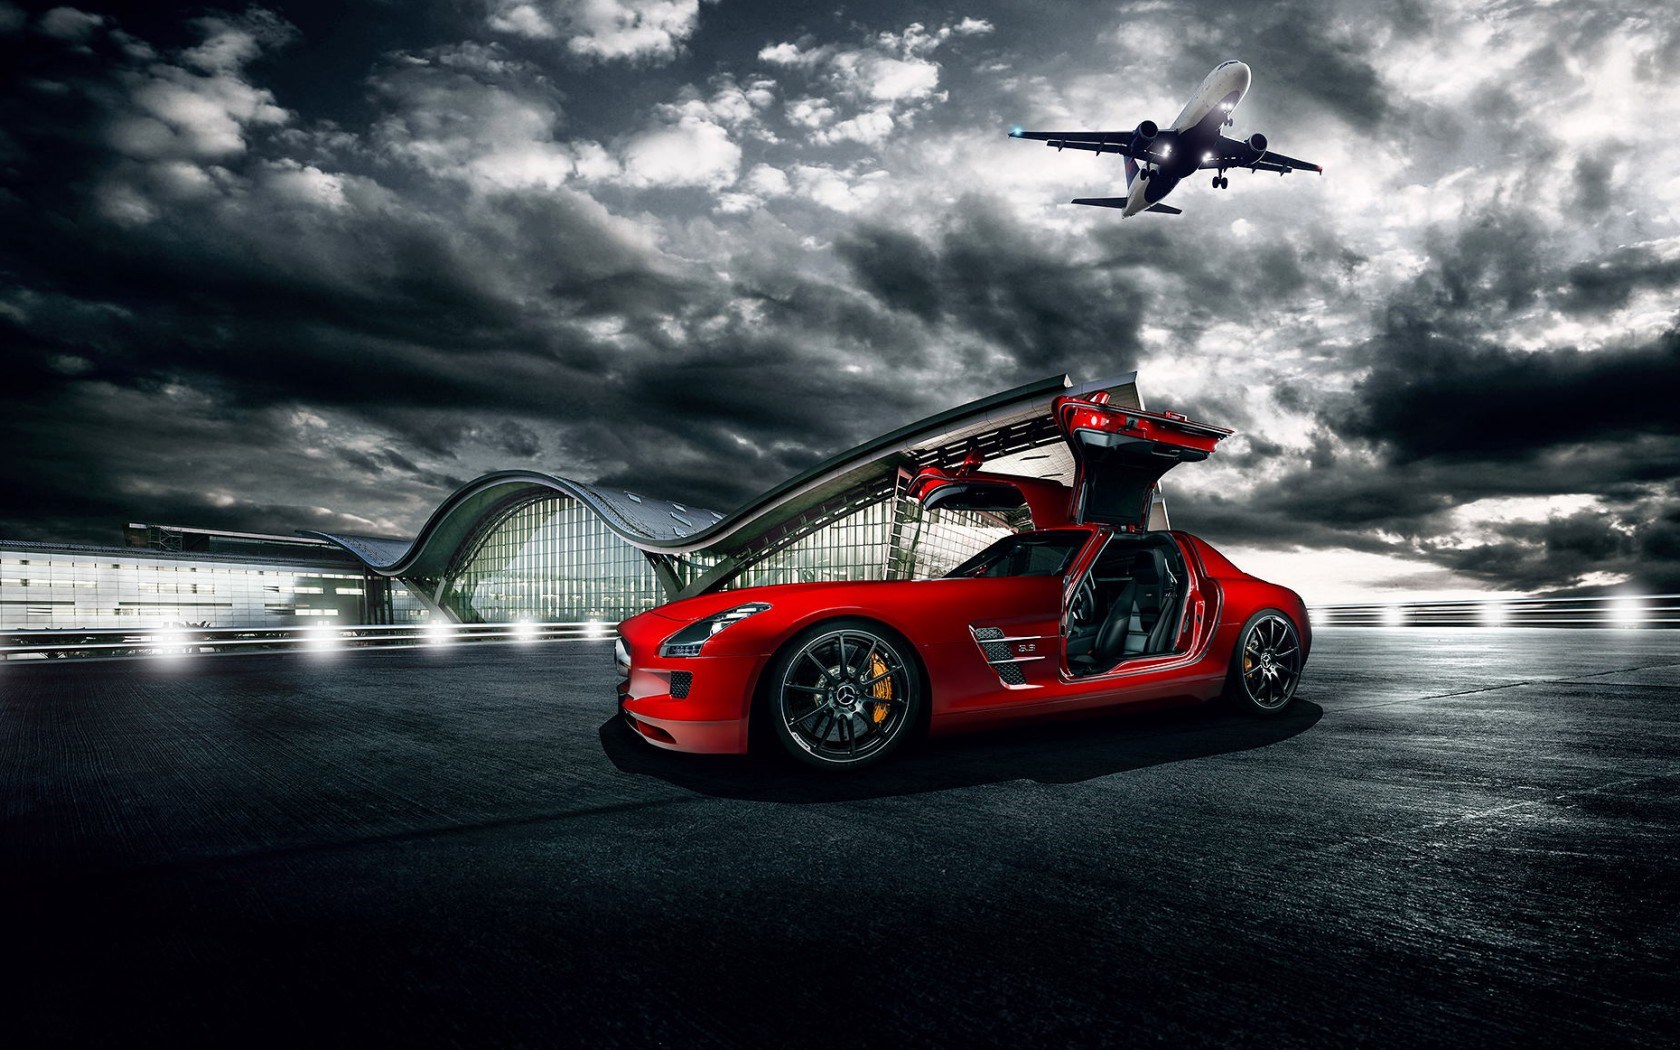 Gorgeous Mercedes Benz Sls Amg Wallpaper Full HD Pictures